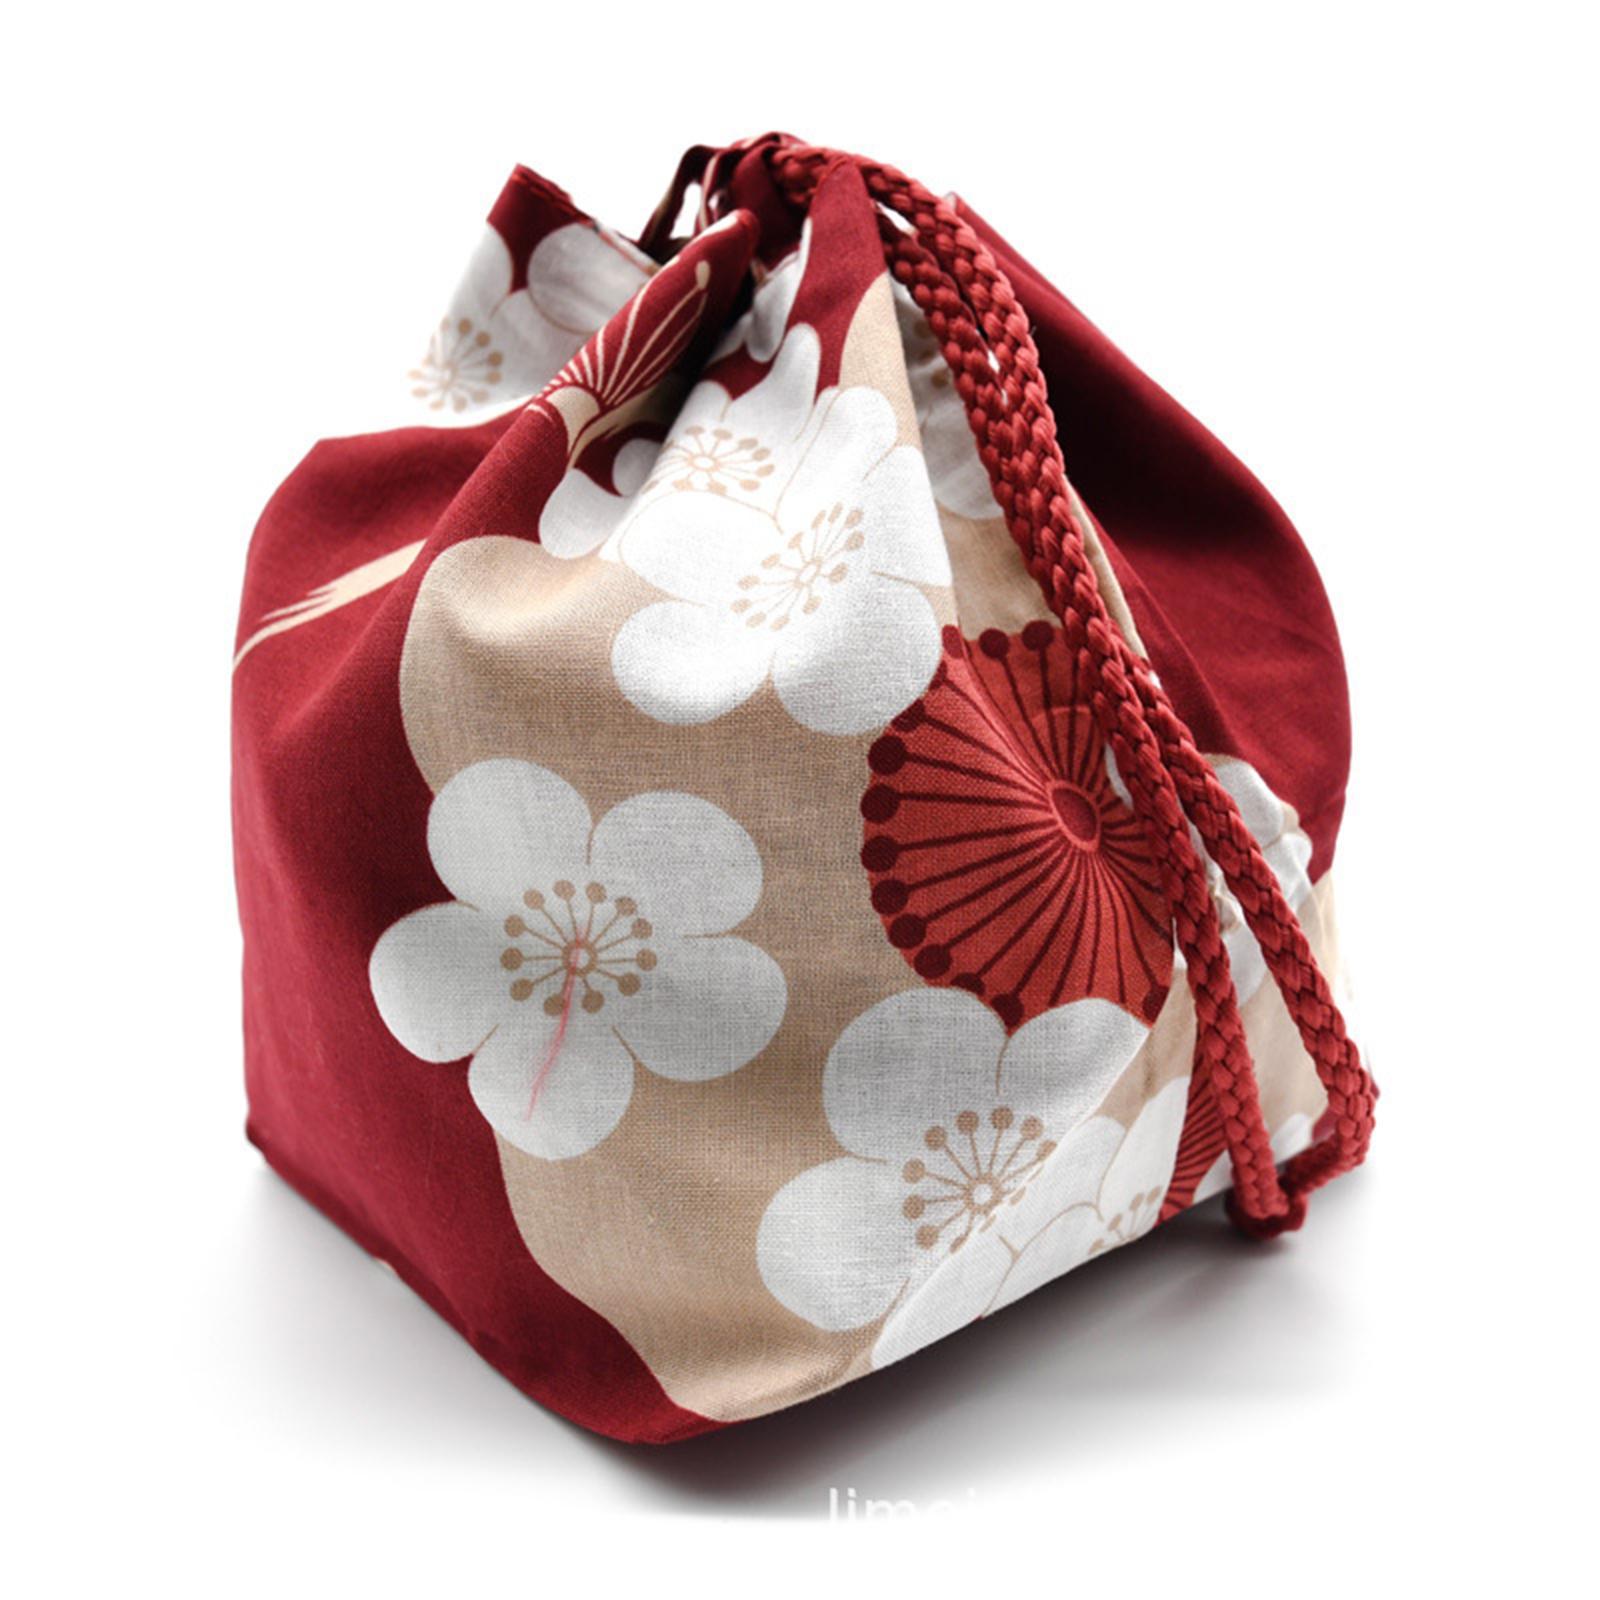 Japanese Drawstring Bag  Purse  Food Pouch  Red